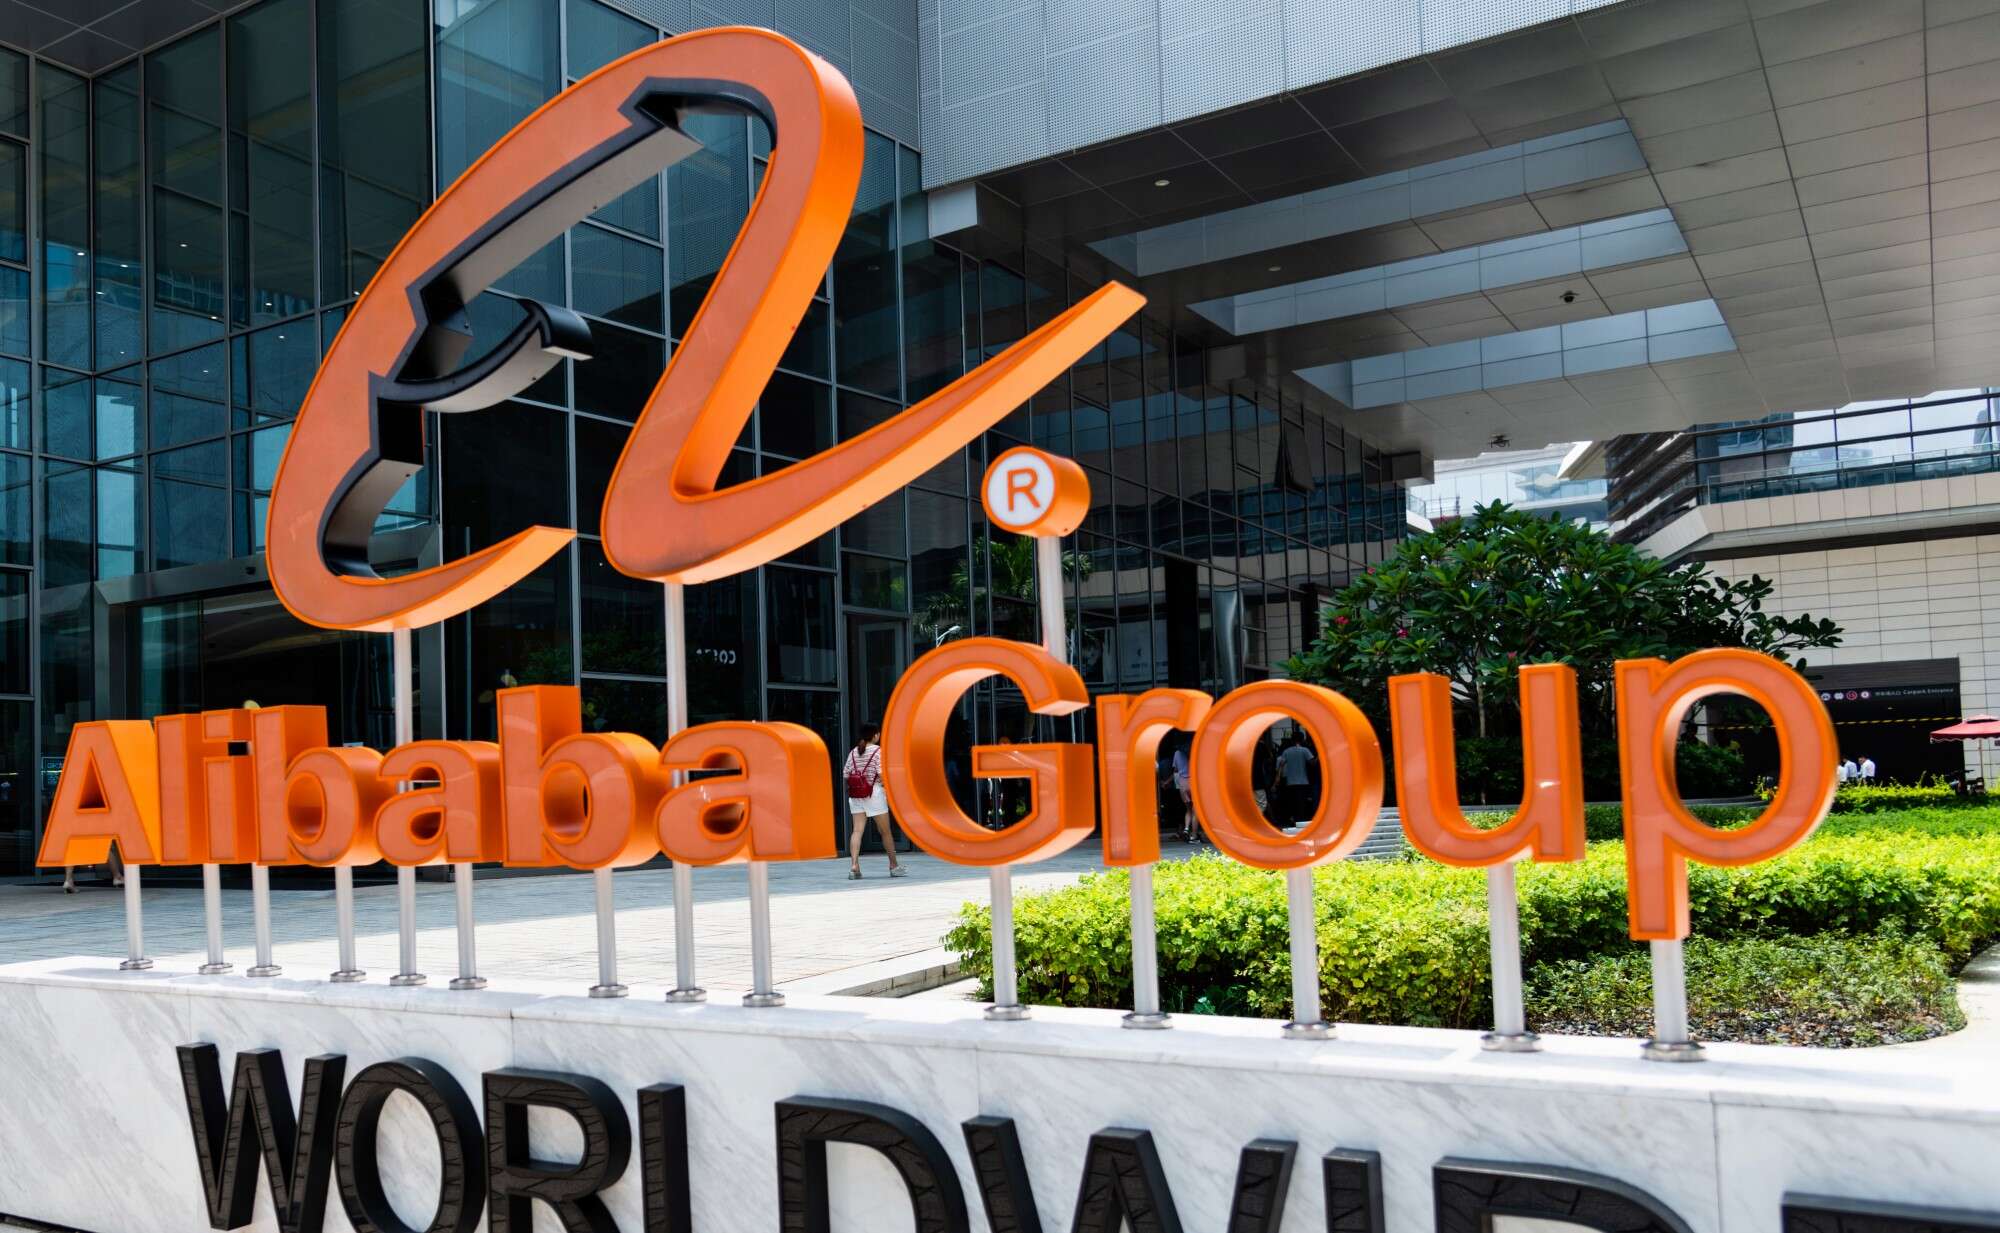 Alibaba Cloud rolls out AI integration platform for customers beyond China